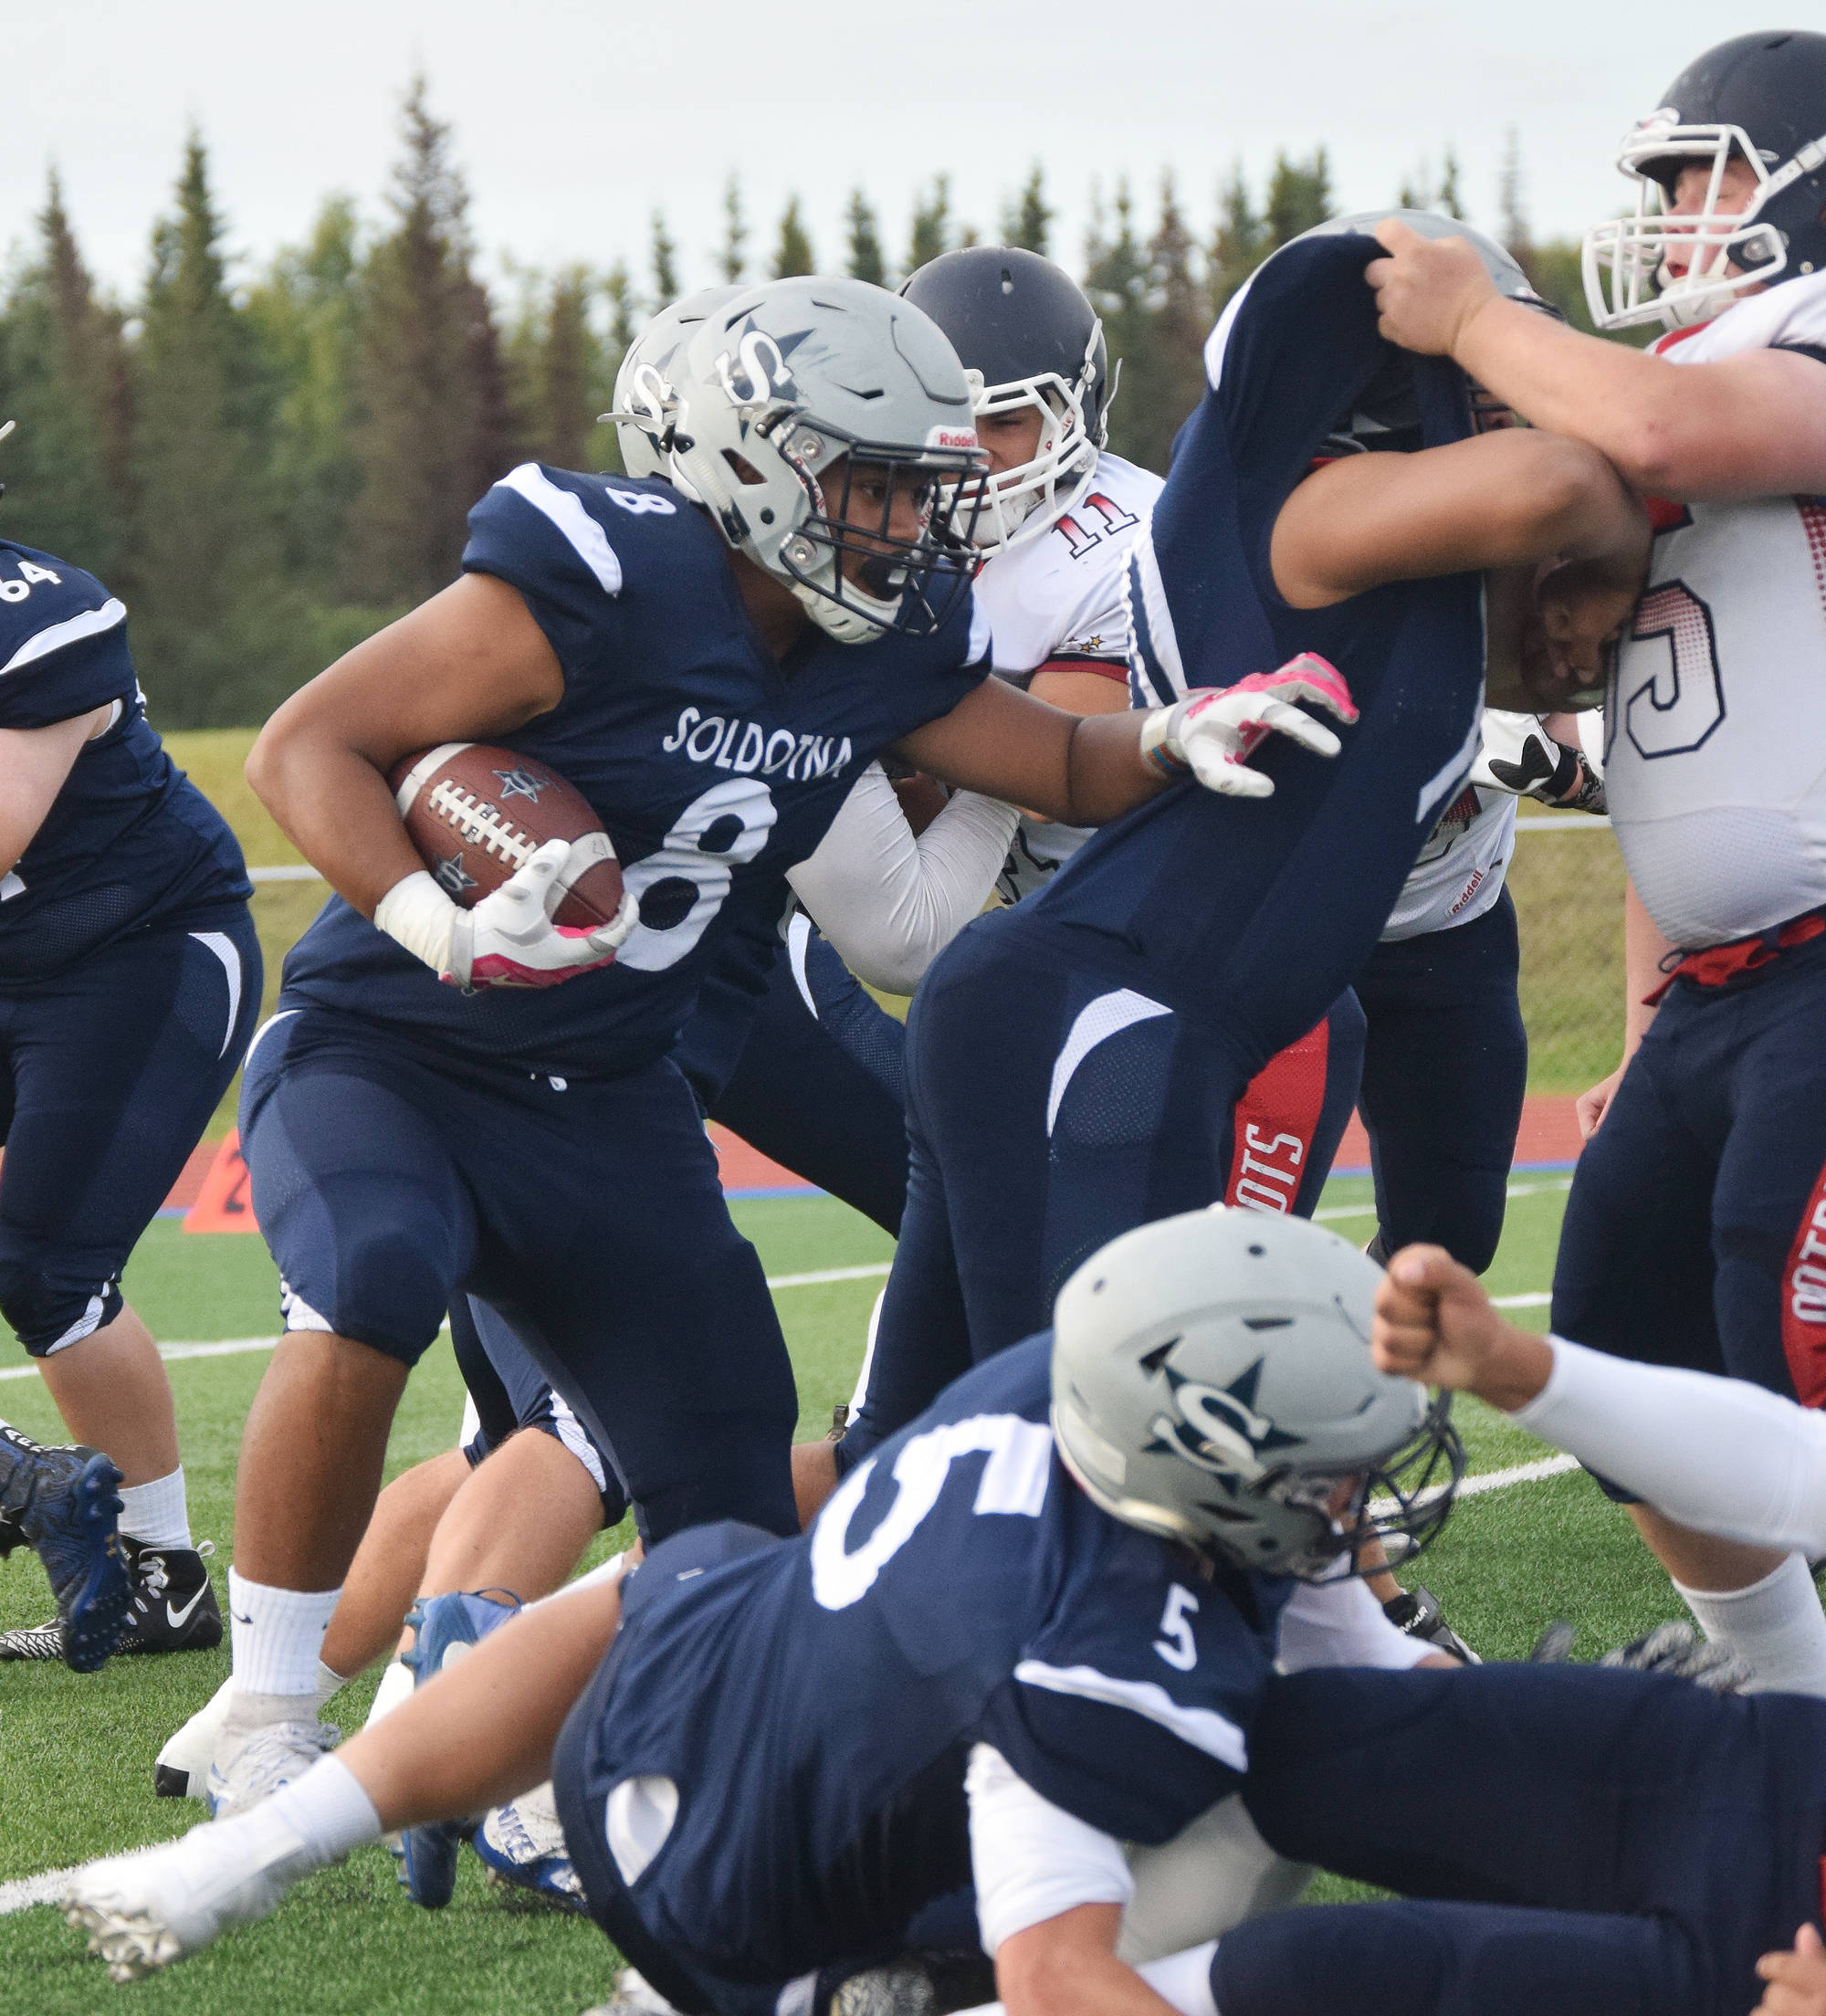 Soldotna junior Aaron Faletoi (8) bursts through the North Pole defense to gain some yards Friday at Soldotna’s Justin Maile Field. (Photo by Joey Klecka/Peninsula Clarion)